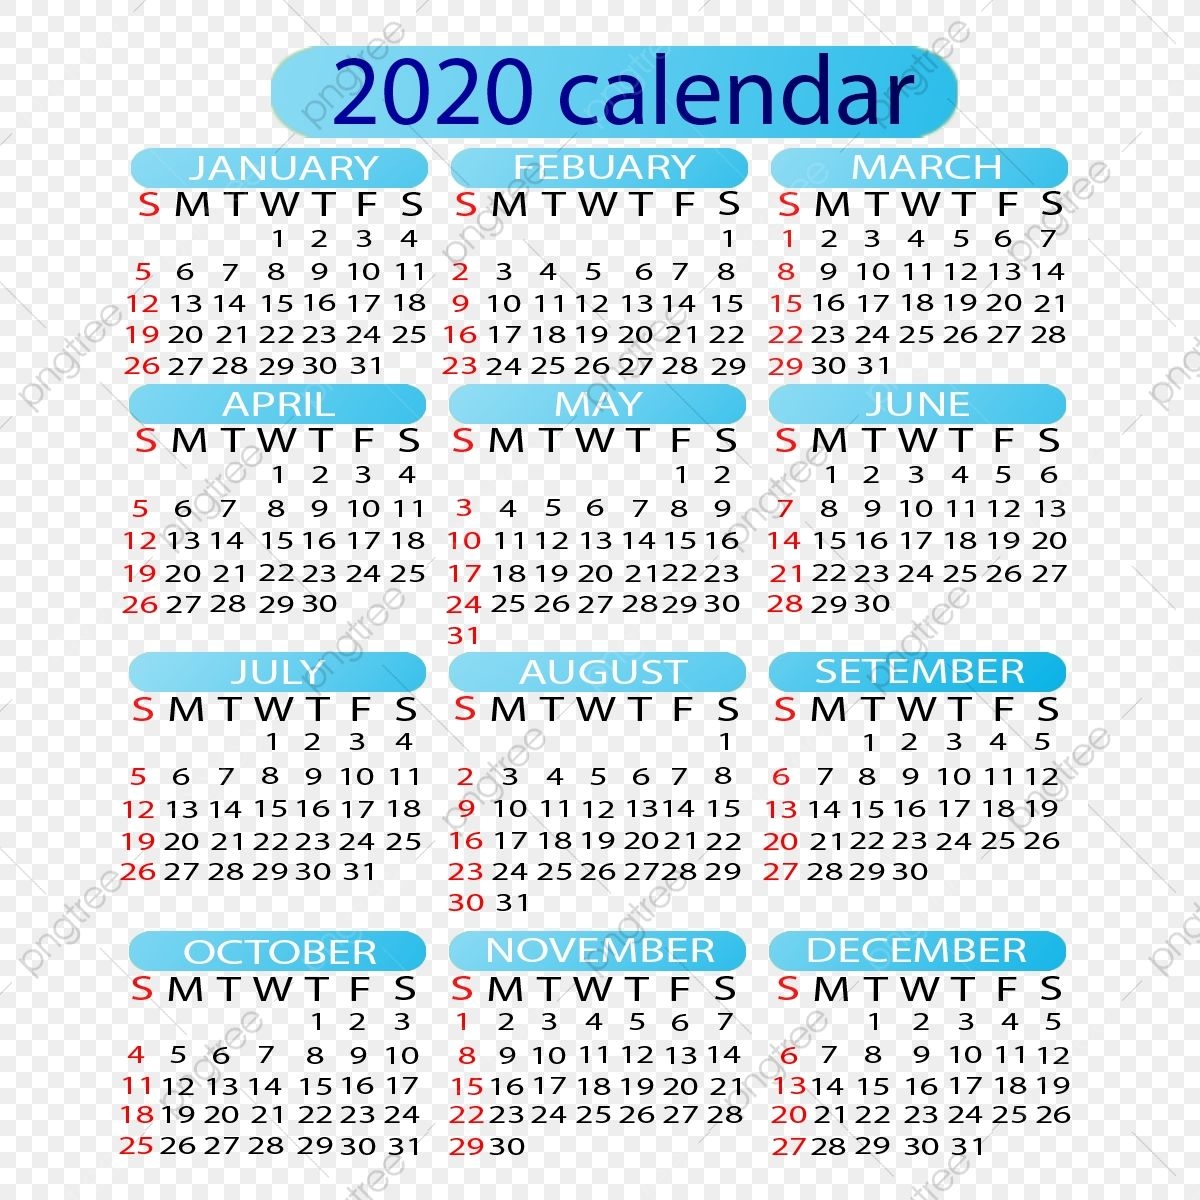 2020 Calendar Png Images | Vector And Psd Files | Free